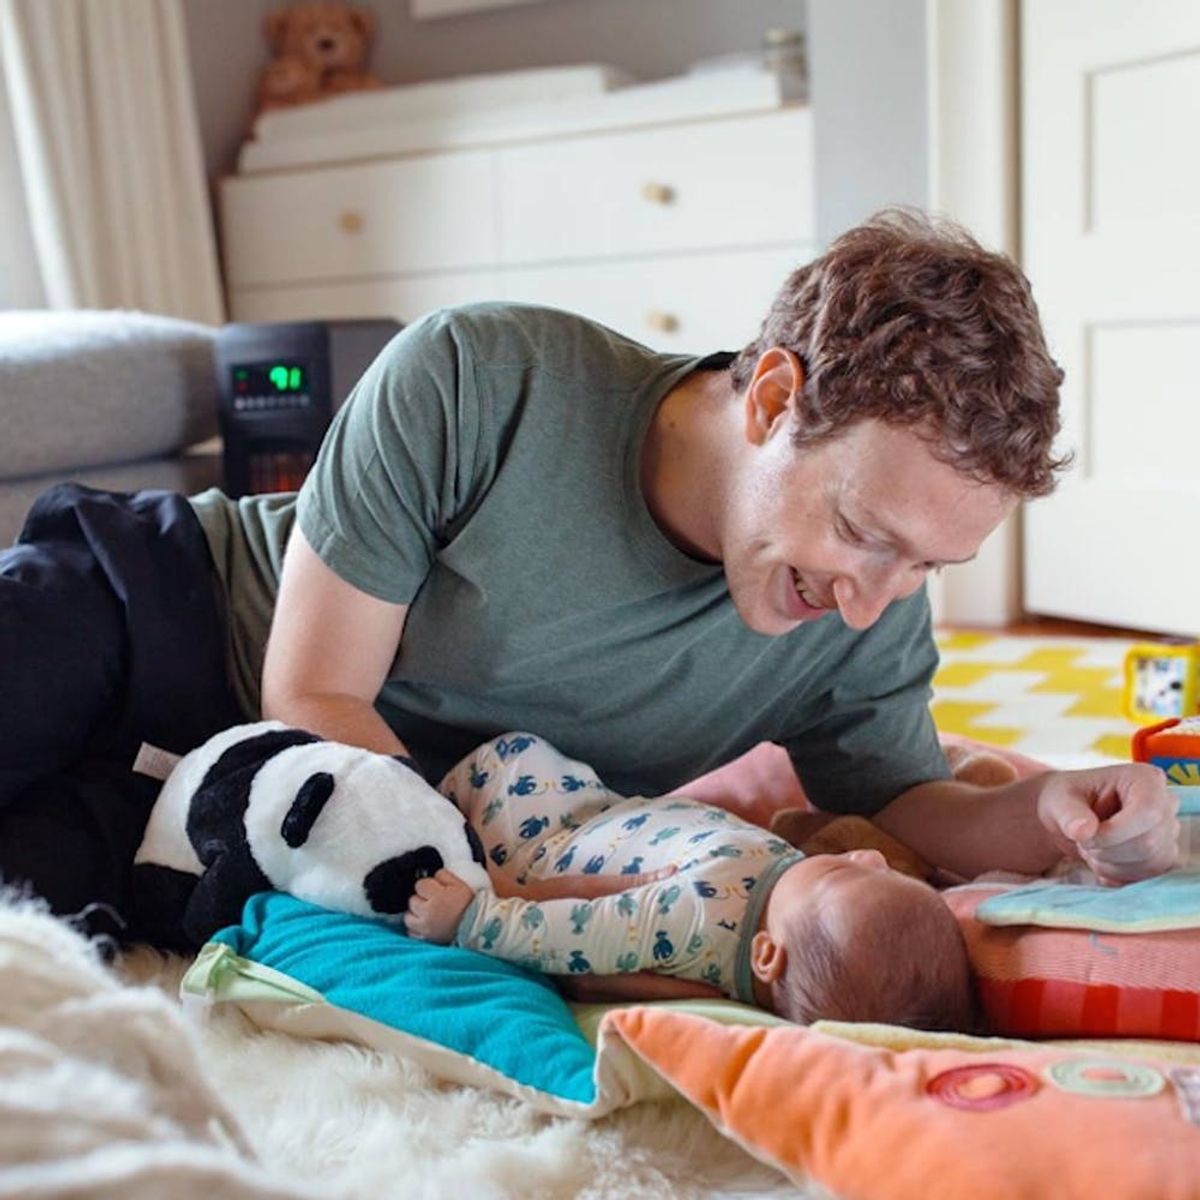 Morning Buzz! Mark Zuckerberg Celebrates His First Father’s Day With an Adorable Message to His Daughter + More